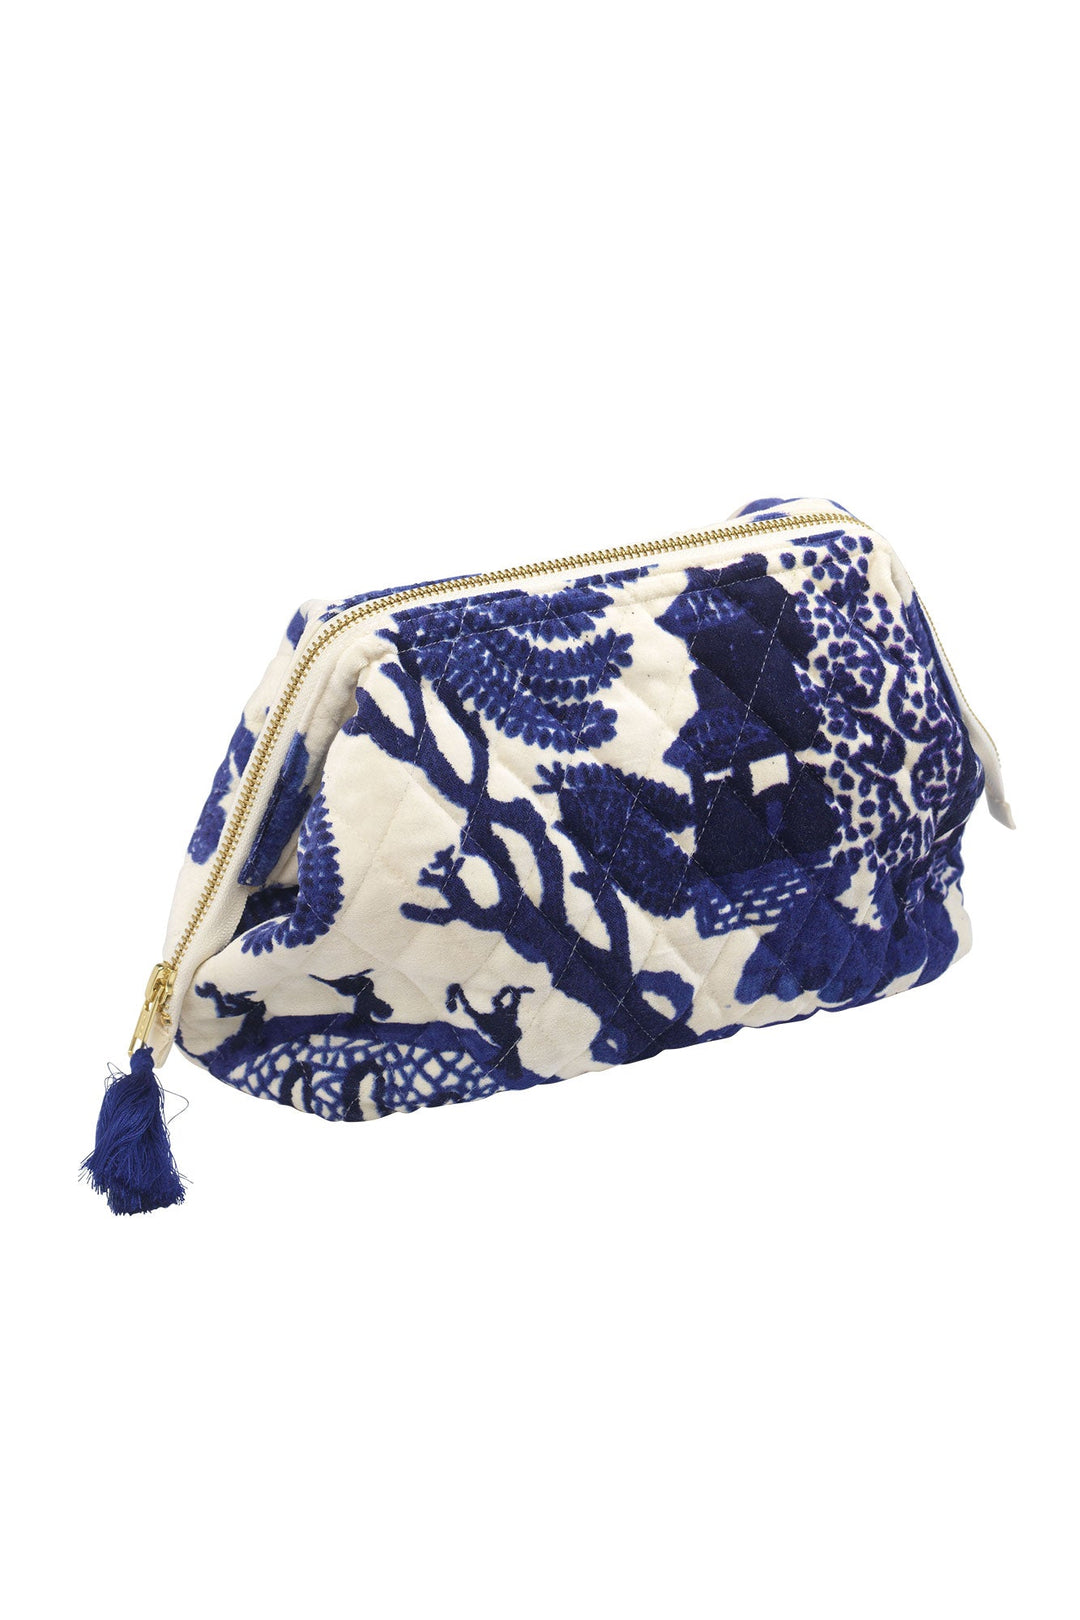 Women's accessories, gifts for her. Velvet make-up clutch bag in blue and white giant willow print by One Hundred Stars